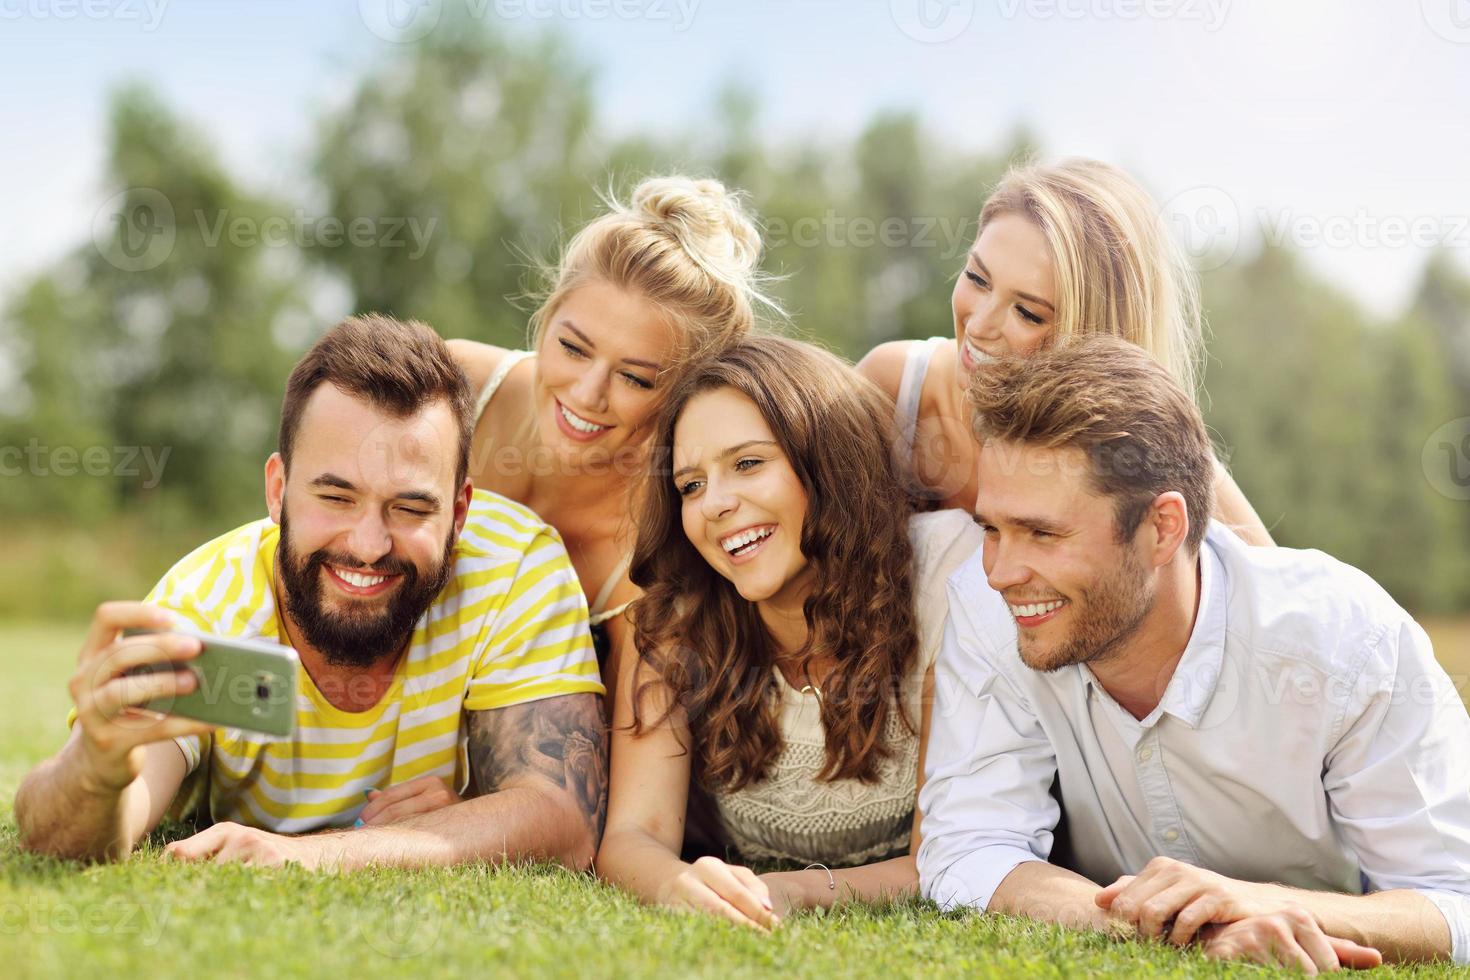 Friends group having fun together on grass photo